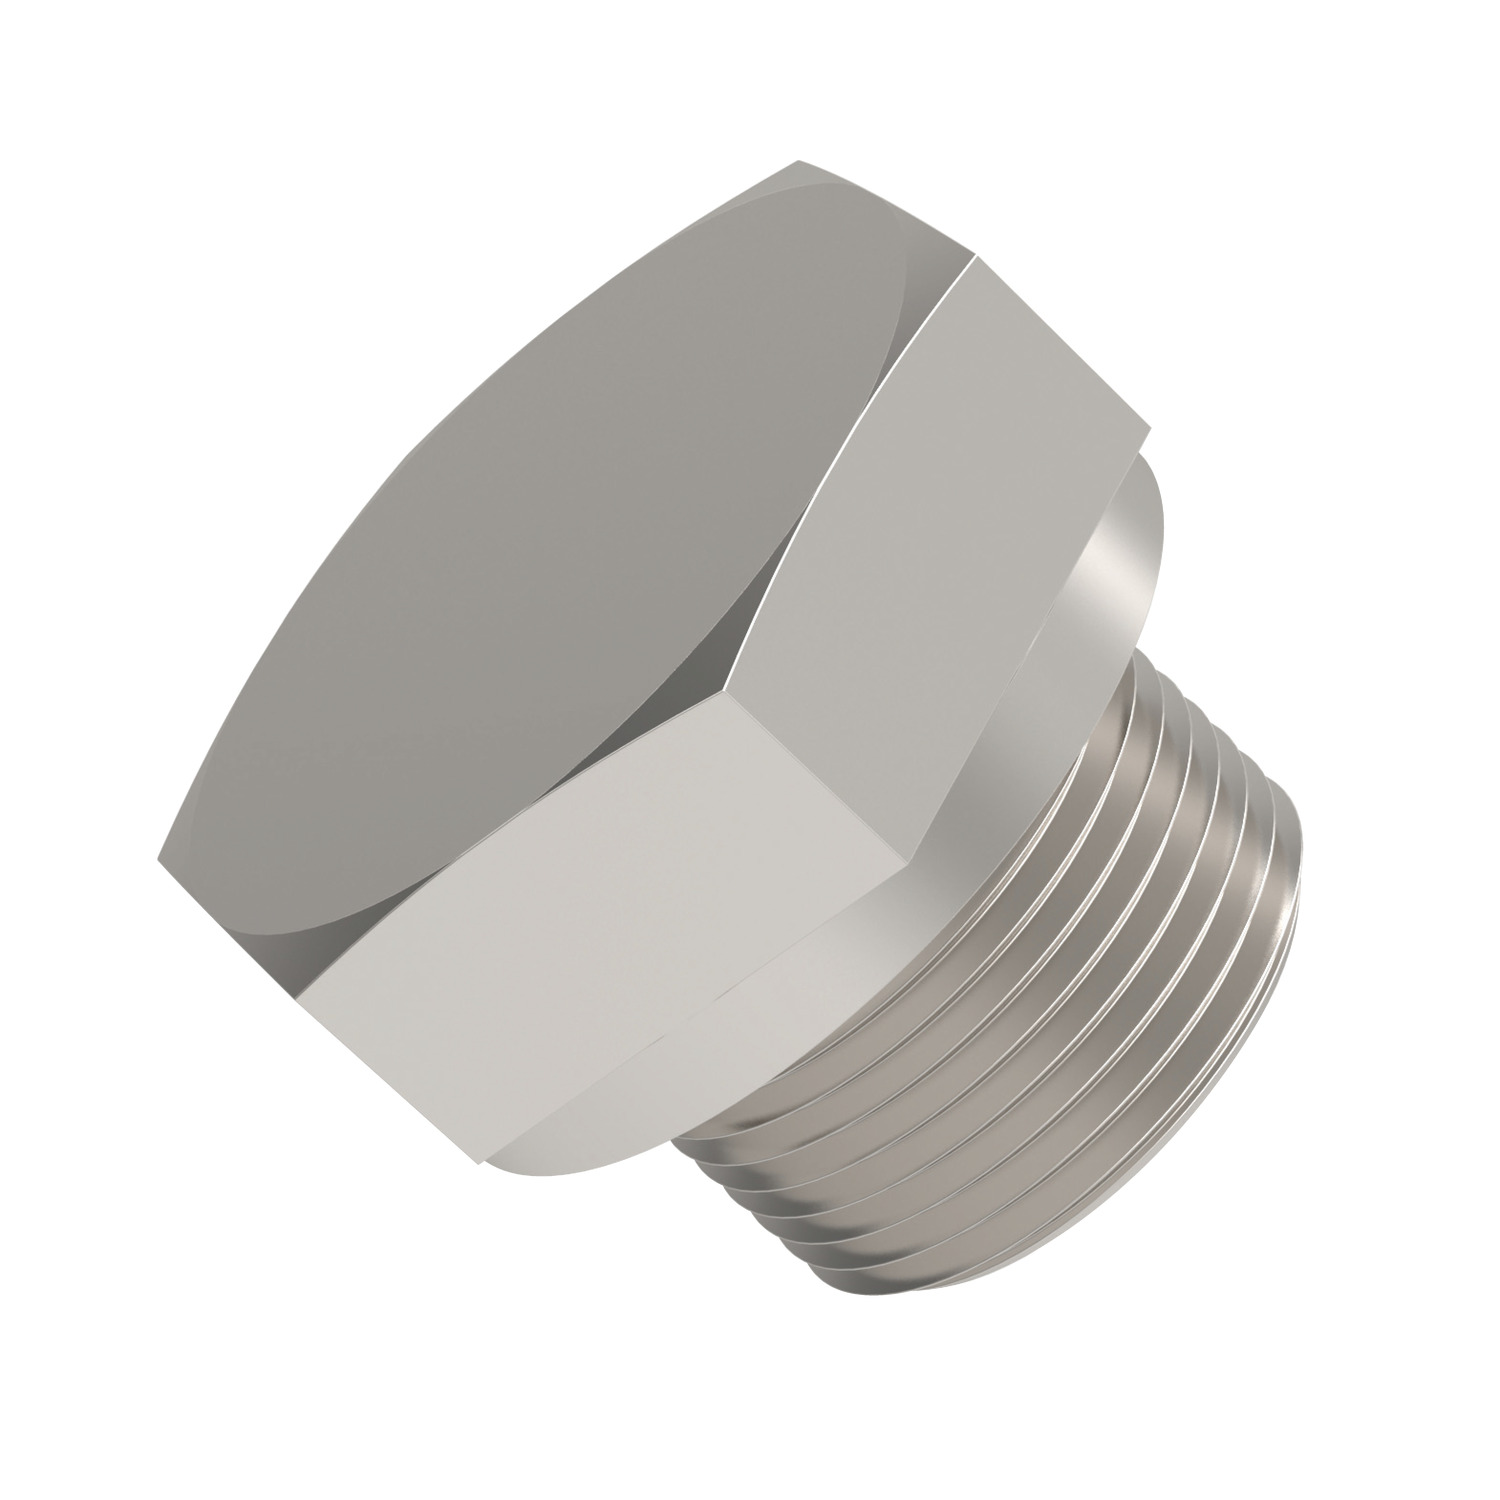 Hexagon Blanking Plugs Blanking plugs for metric threads. In stainless, steel and brass. To DIN 7604A.